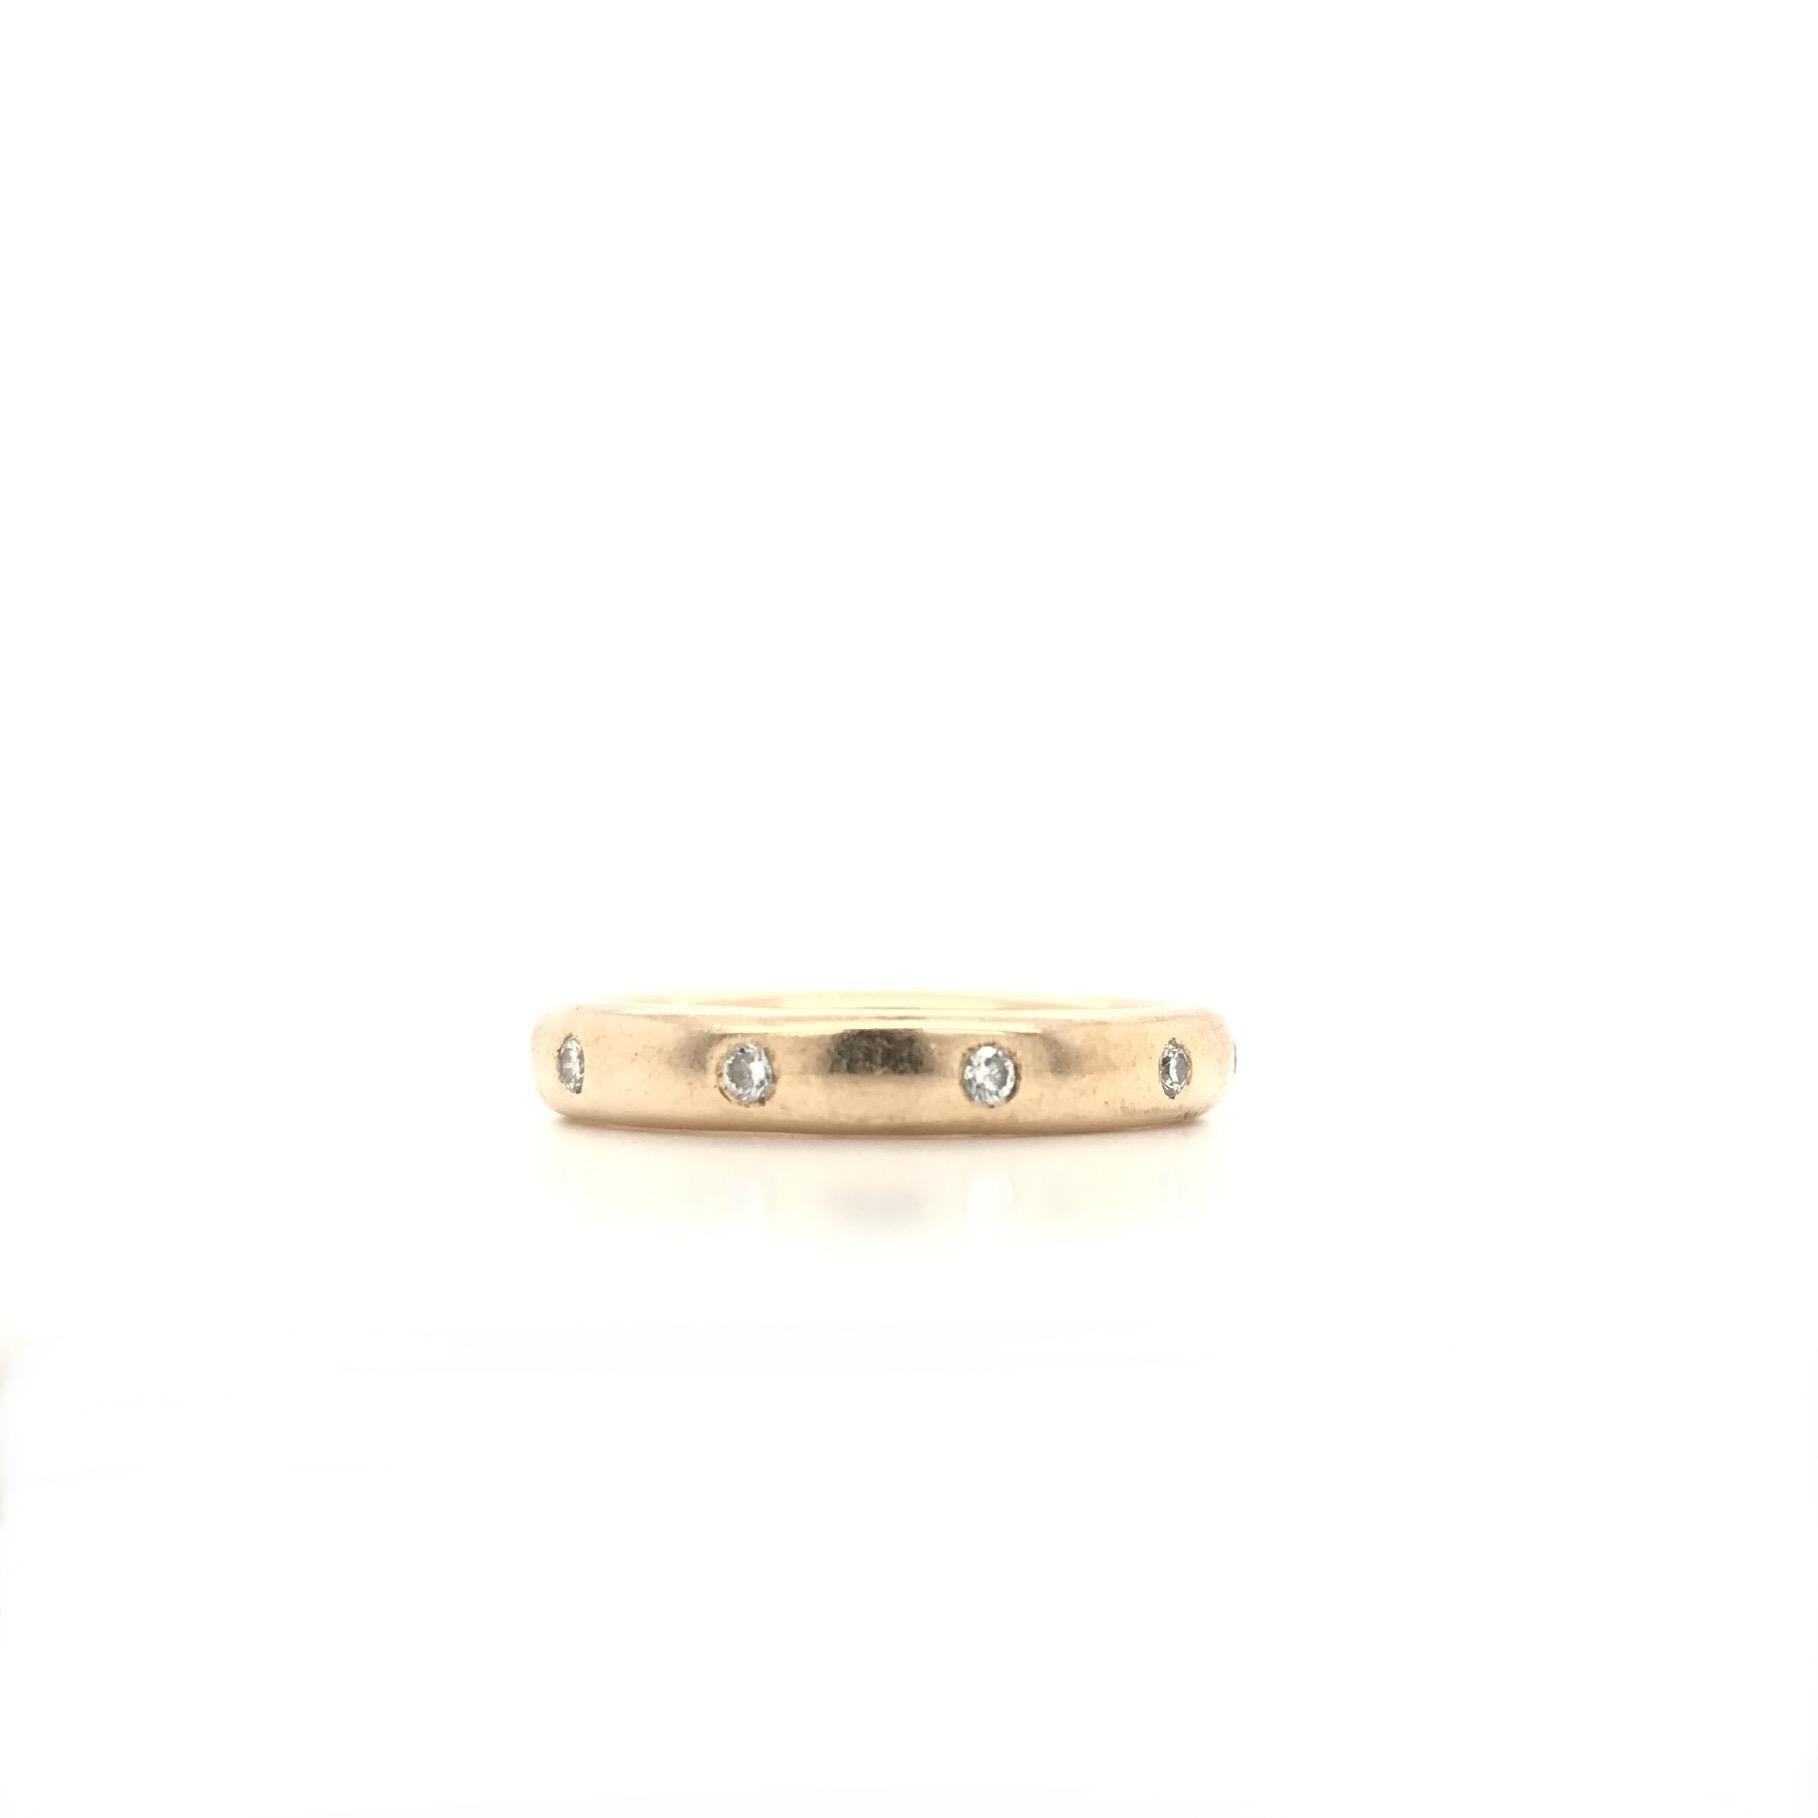 This contemporary estate 14K gold band features 10 tiny sparkling flush set diamonds. The 10 tiny diamonds encompass the entire length of the band. This modern style would compliment a curated stack of diamond bands or modern wedding set